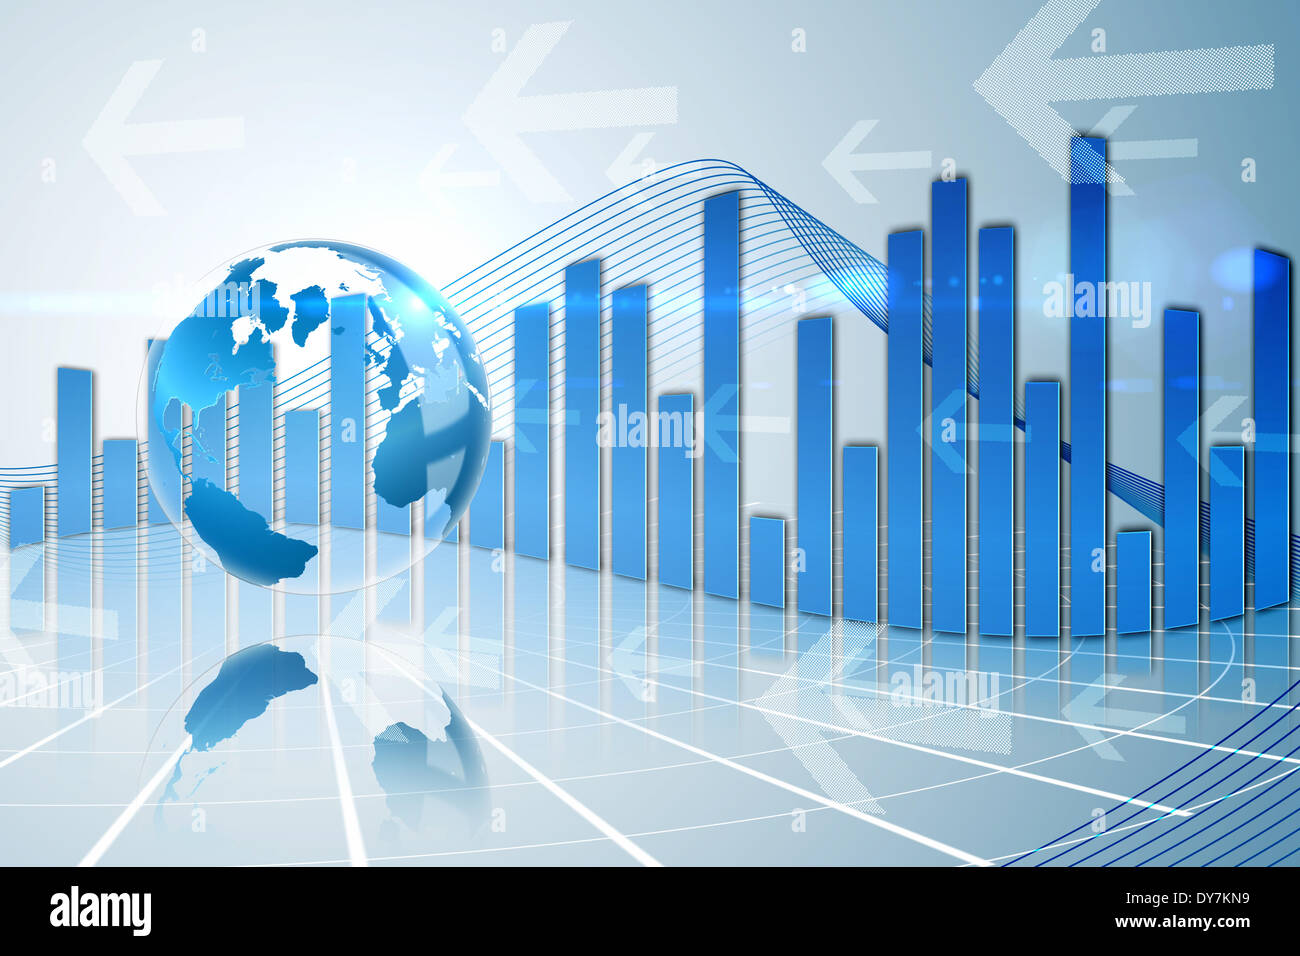 Global business graphic in blue Stock Photo